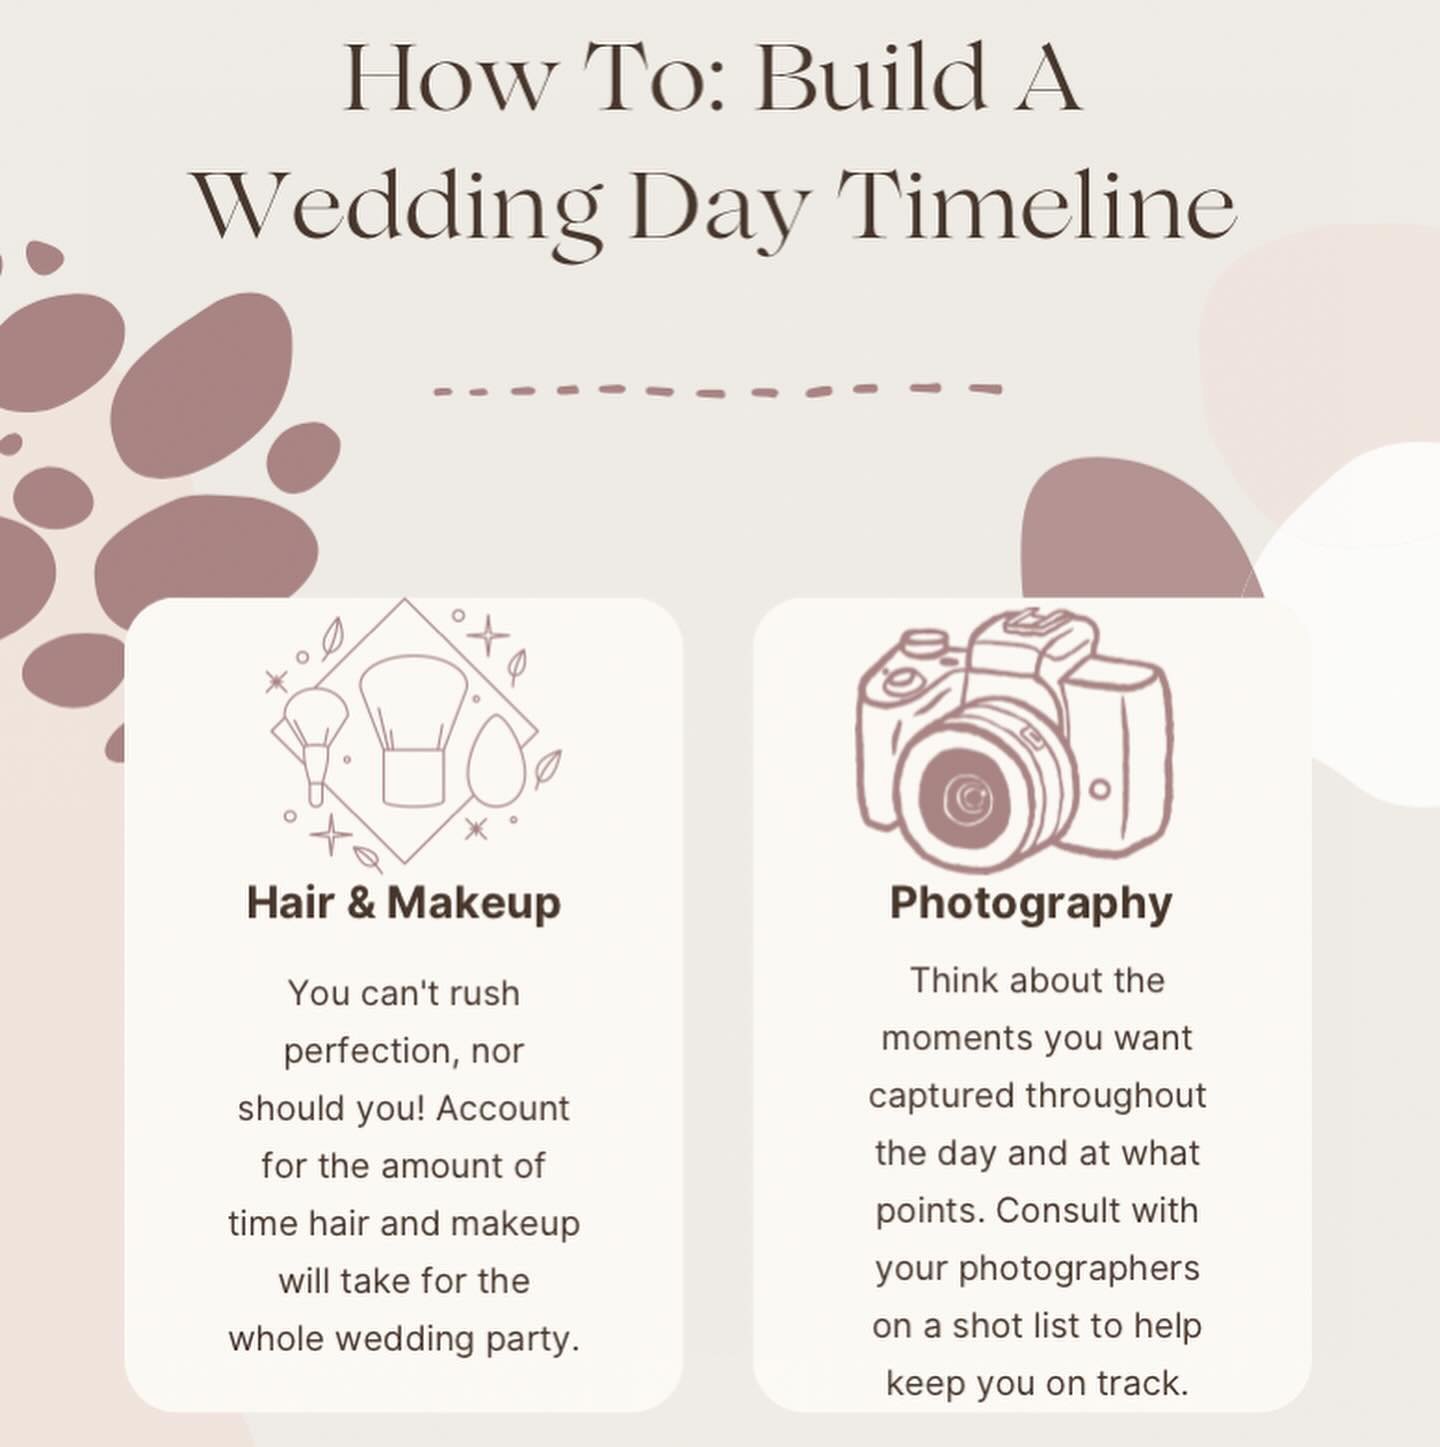 One of the most important components of your wedding day: your timeline. When most people think about their timeline, they think about the timing of the wedding from the ceremony to the reception. But what about before the wedding? Your timeline shou